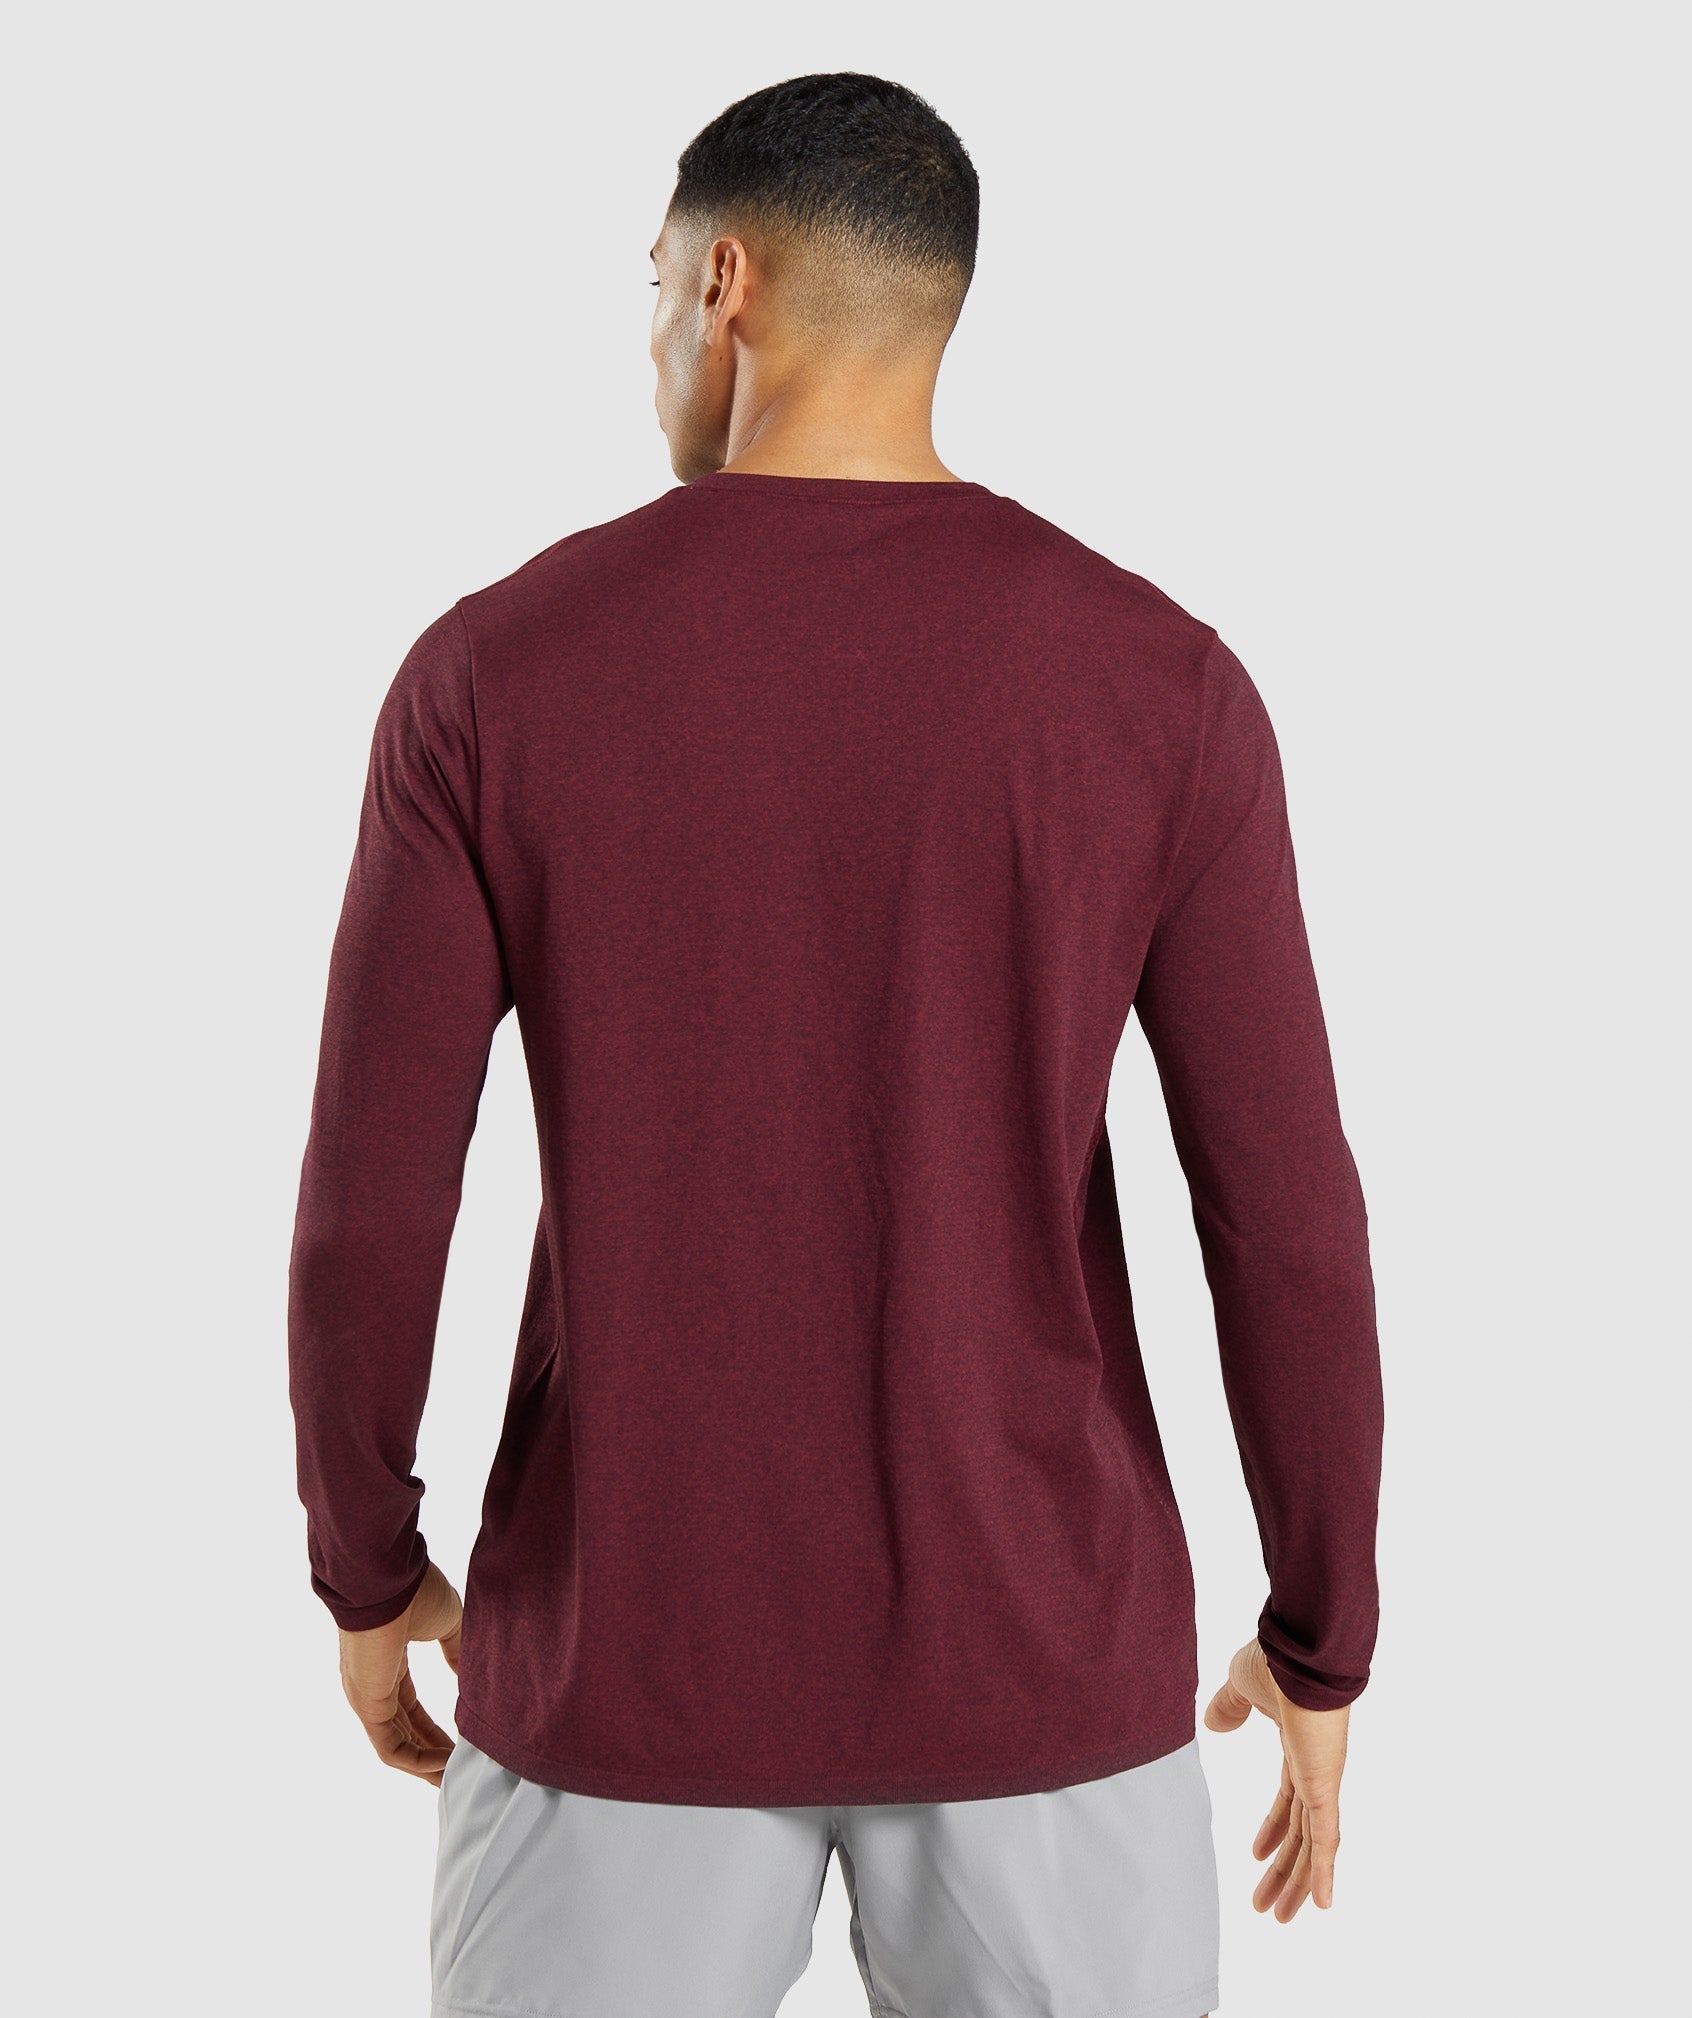 Arrival Seamless Long Sleeve T-Shirt in Burgundy Red Marl - view 3